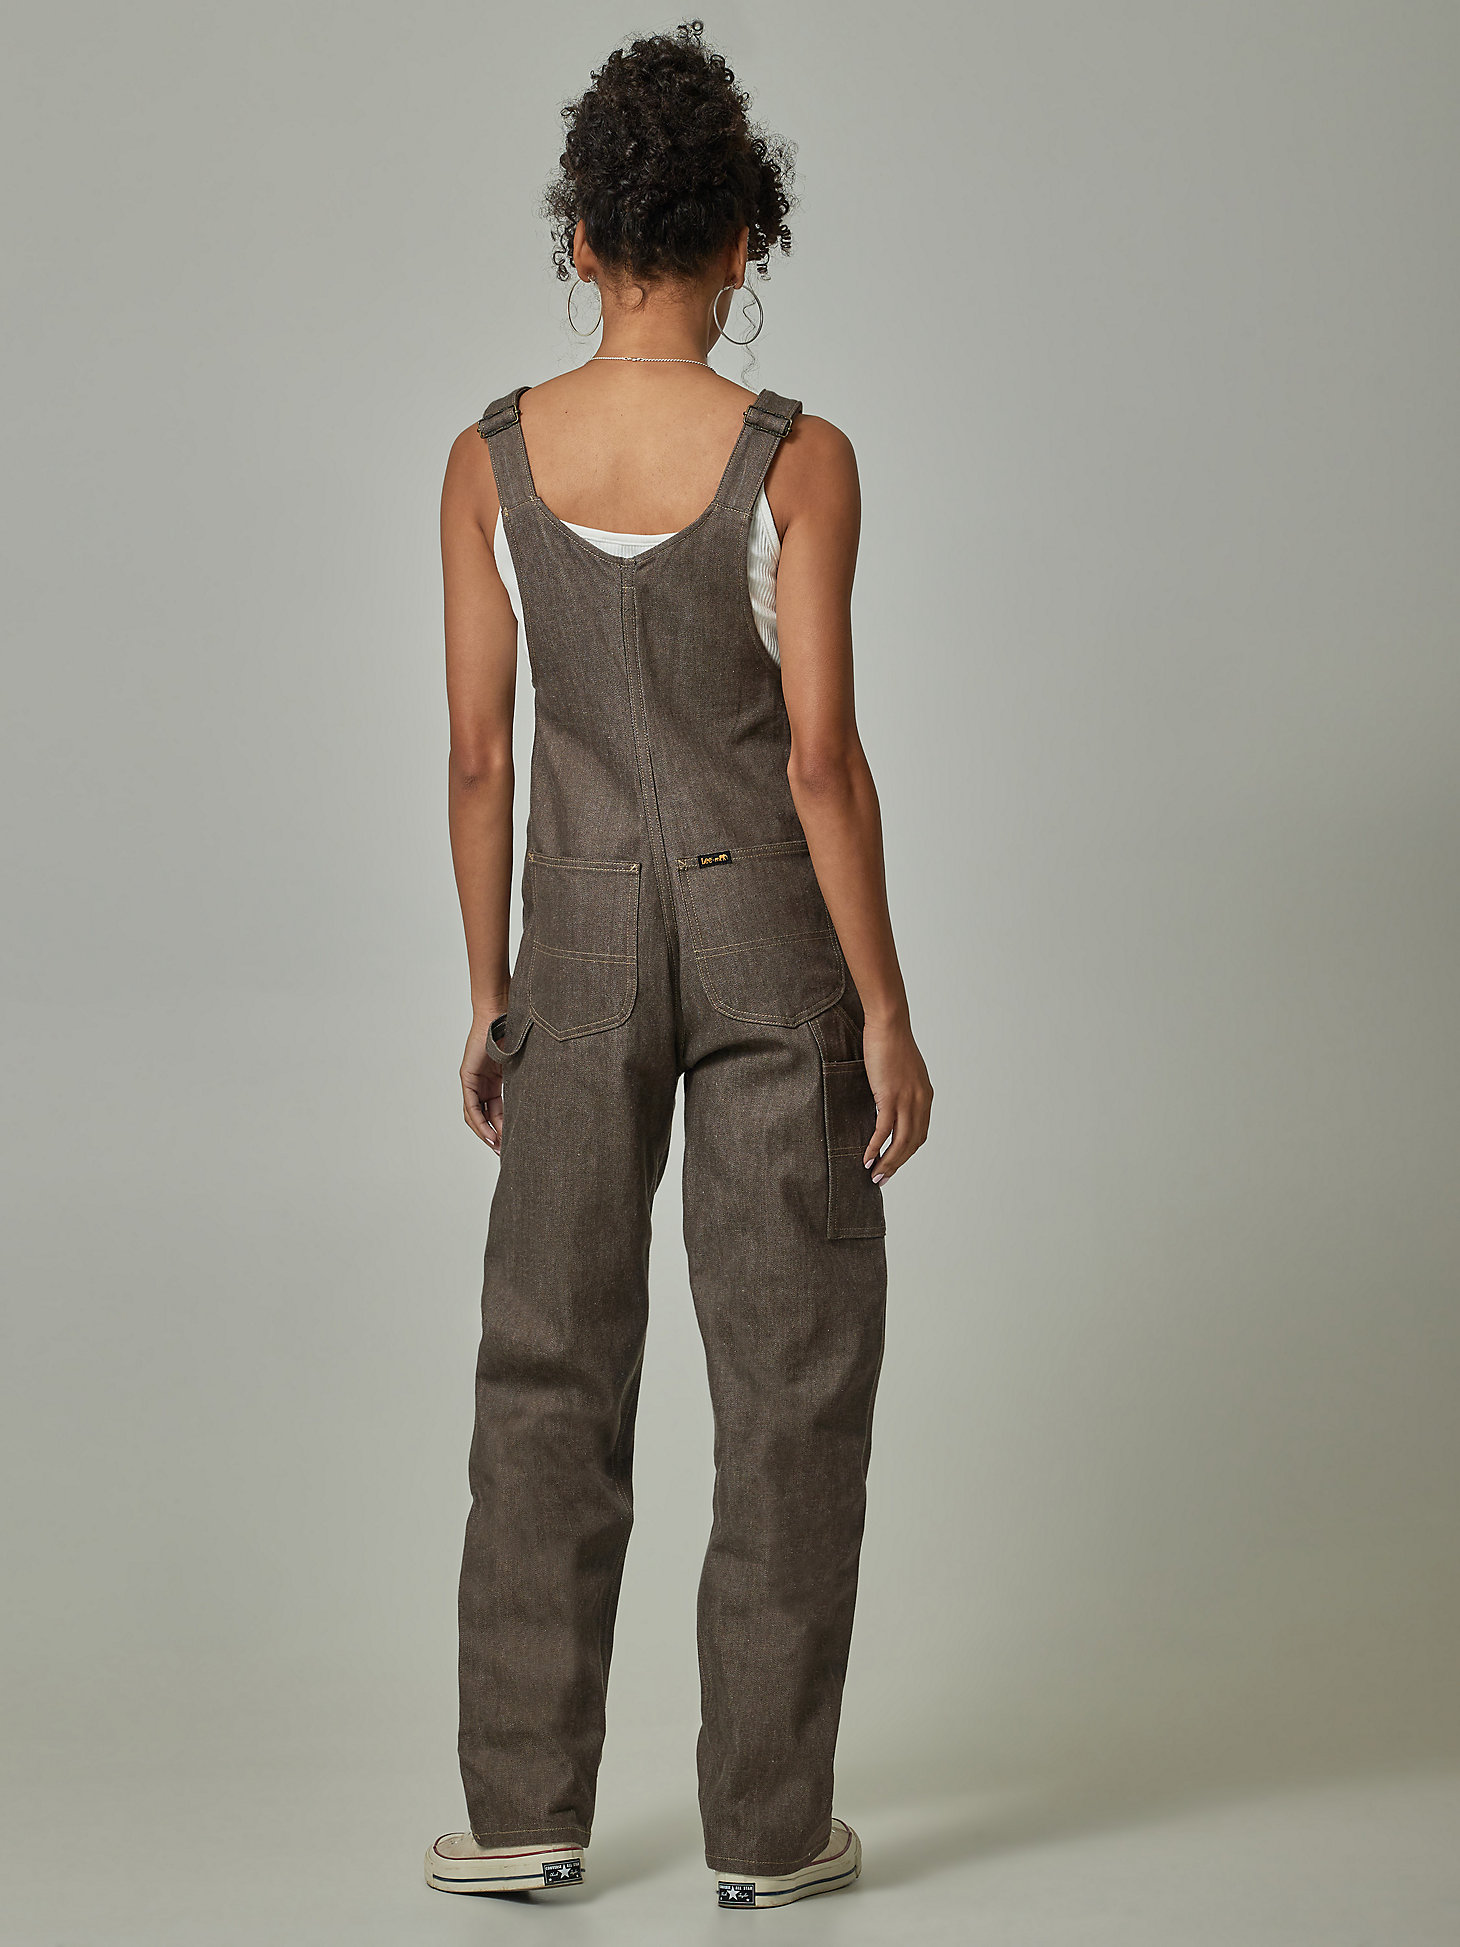 Women's Lee® x The Brooklyn Circus® Whizit Zip Bib Overall in Brown Selvedge alternative view 2